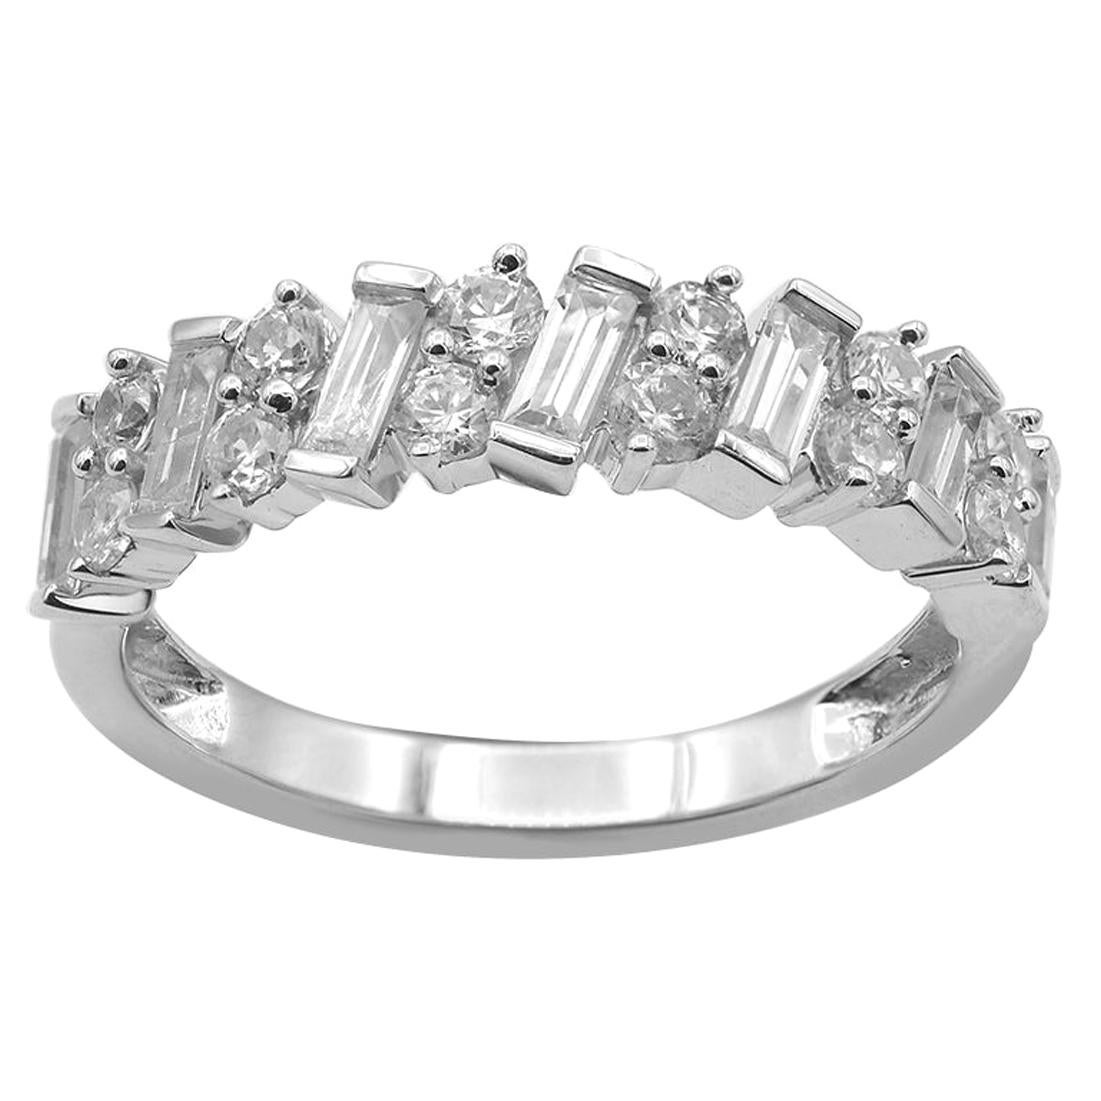 TJD 1Carat Round & Baguette Diamond 14K White Gold Stackable Half Eternity Band